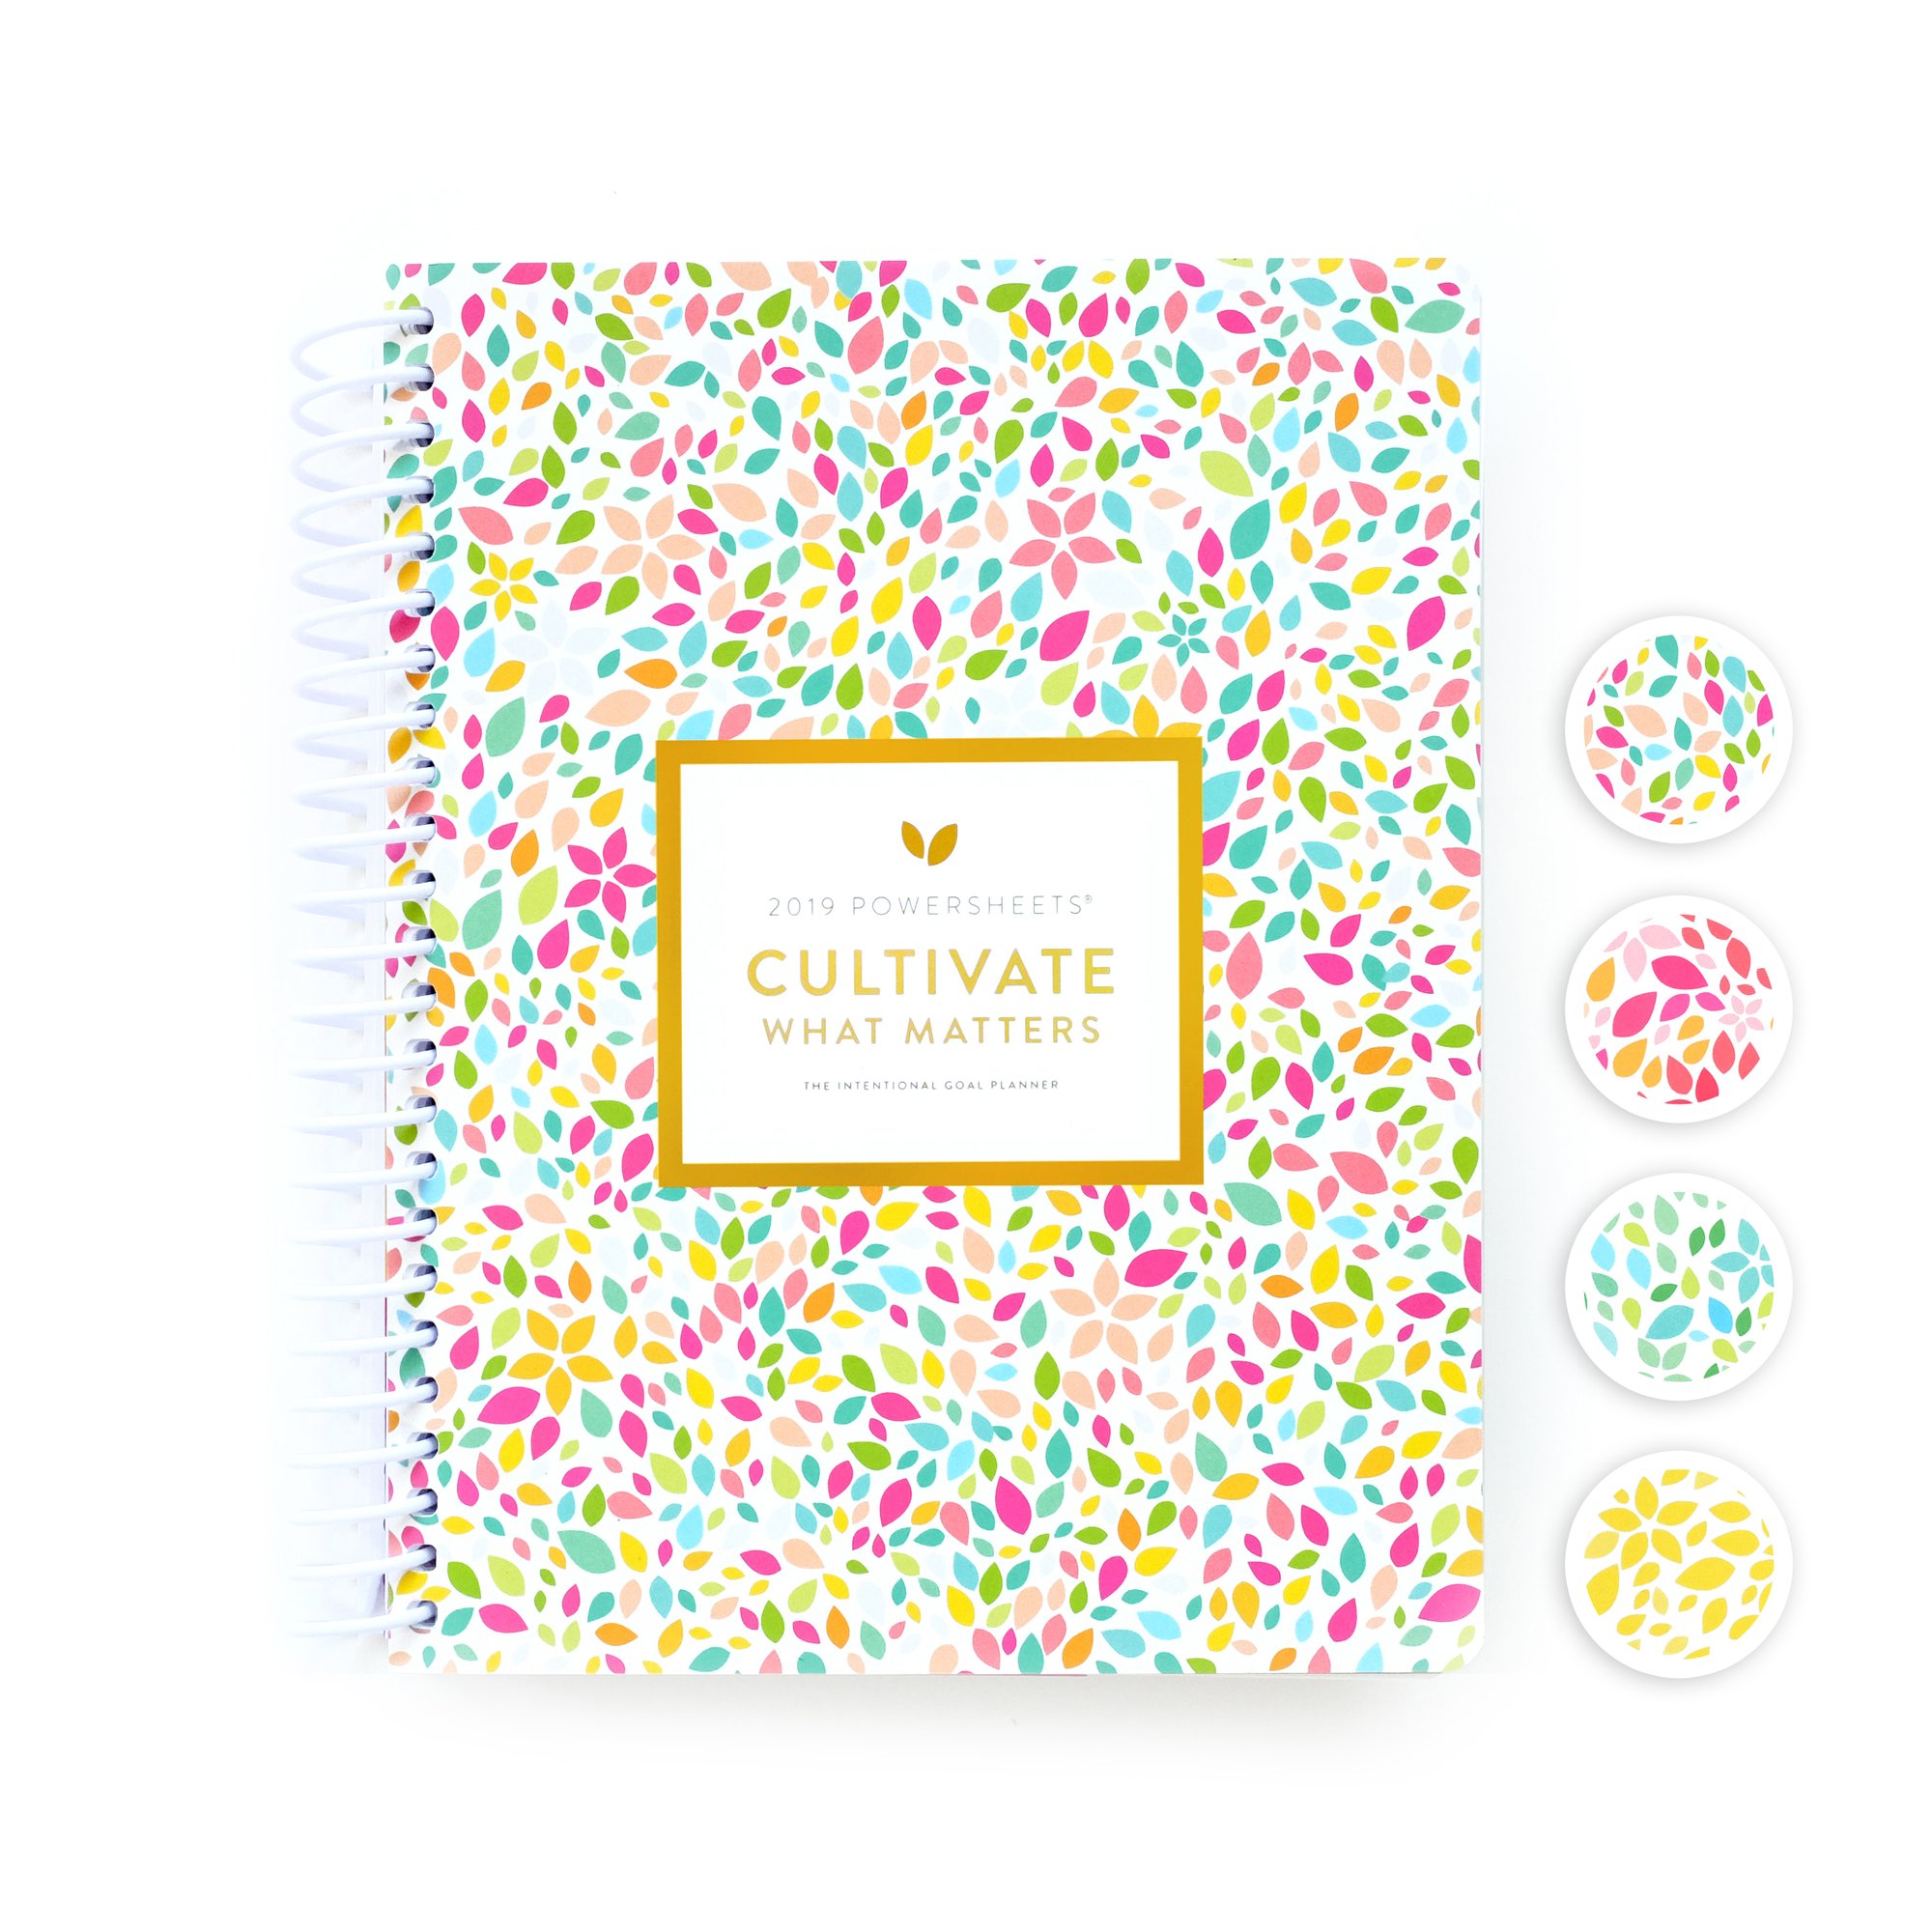 Cultivate what matters, cultivate what matters powersheets, THE ULTIMATE GIFT GUIDE, GIFT GUIDE FOR WOMEN, GIFT GUIDE FOR MEN, GIFT GUIDE FOR KIDS, GIFT GUIDE FOR TEENS, CHRISTMAS WISHLIST, CHRISTMAS GIFT GUIDE, ULTIMATE GIFT GUIDE, GIFT GUIDE FOR EVERYONE ON YOUR LIST, HOLIDAY GIFT GUIDE,